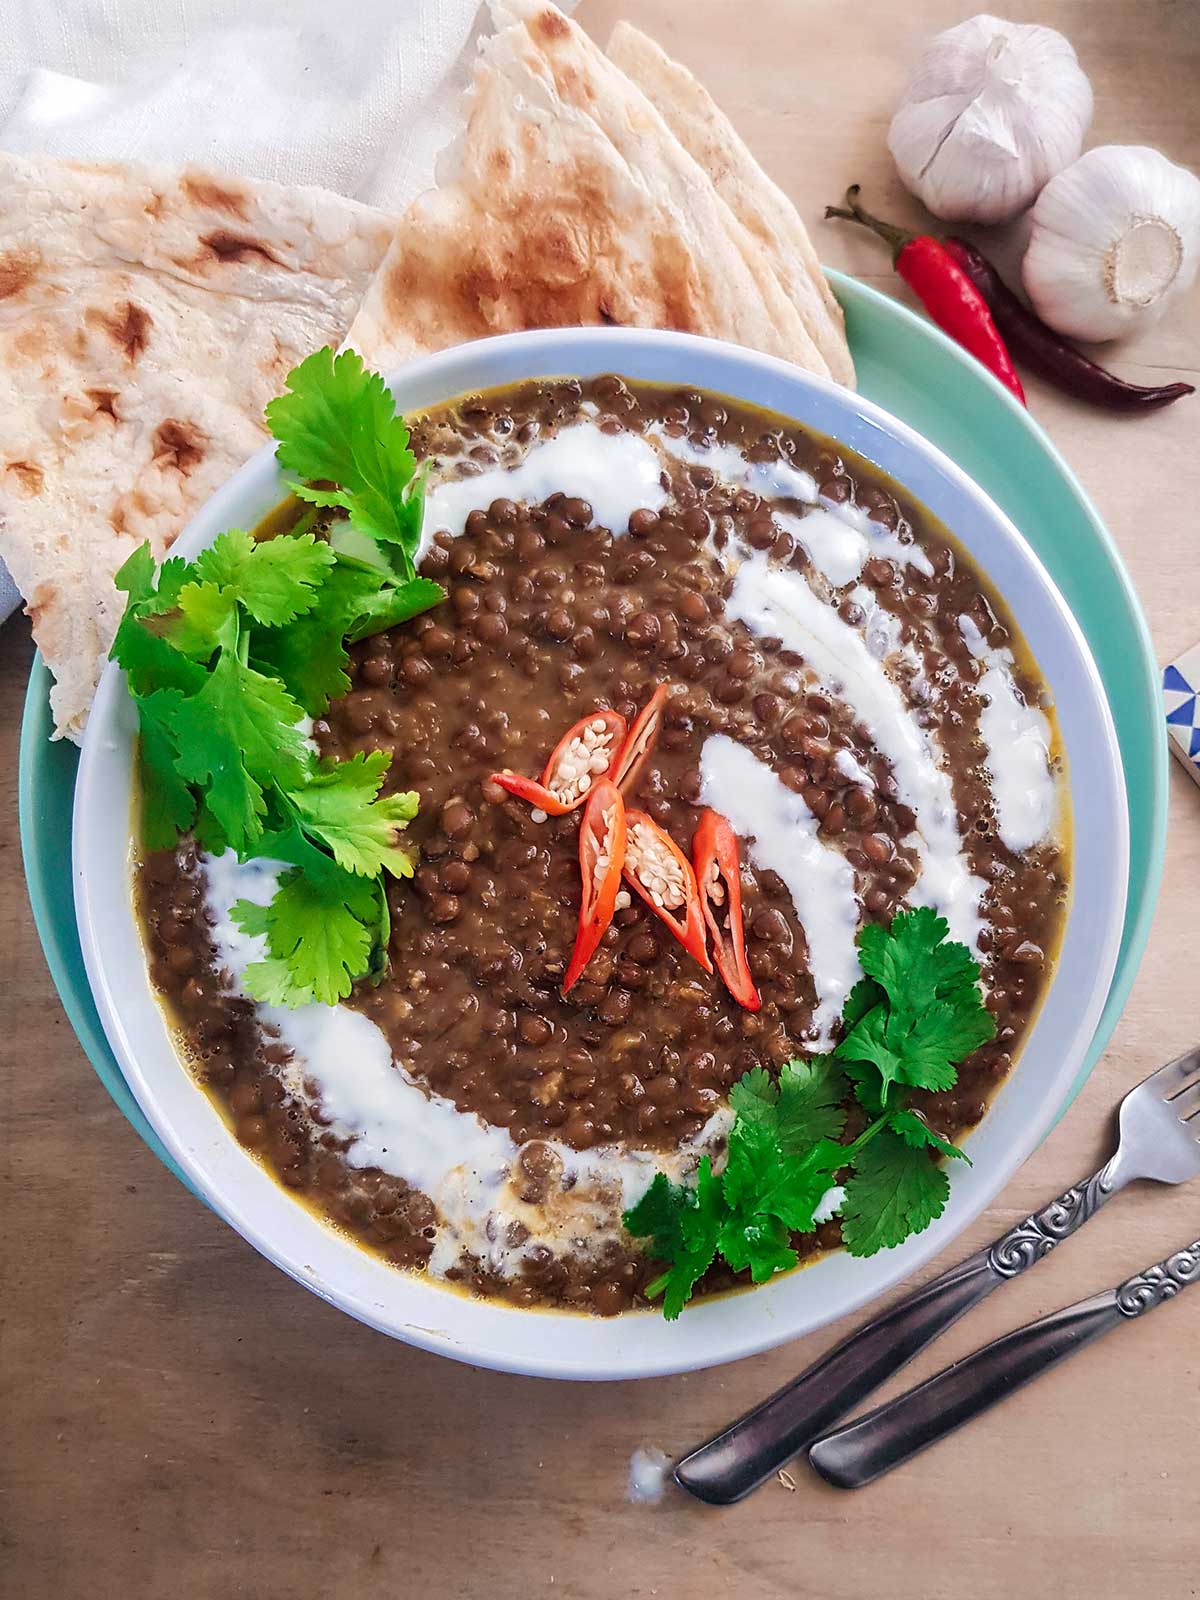 Brown lentil dahl served in a white bowl garnished with green cilantro leaves, coconut cream and red chilies.